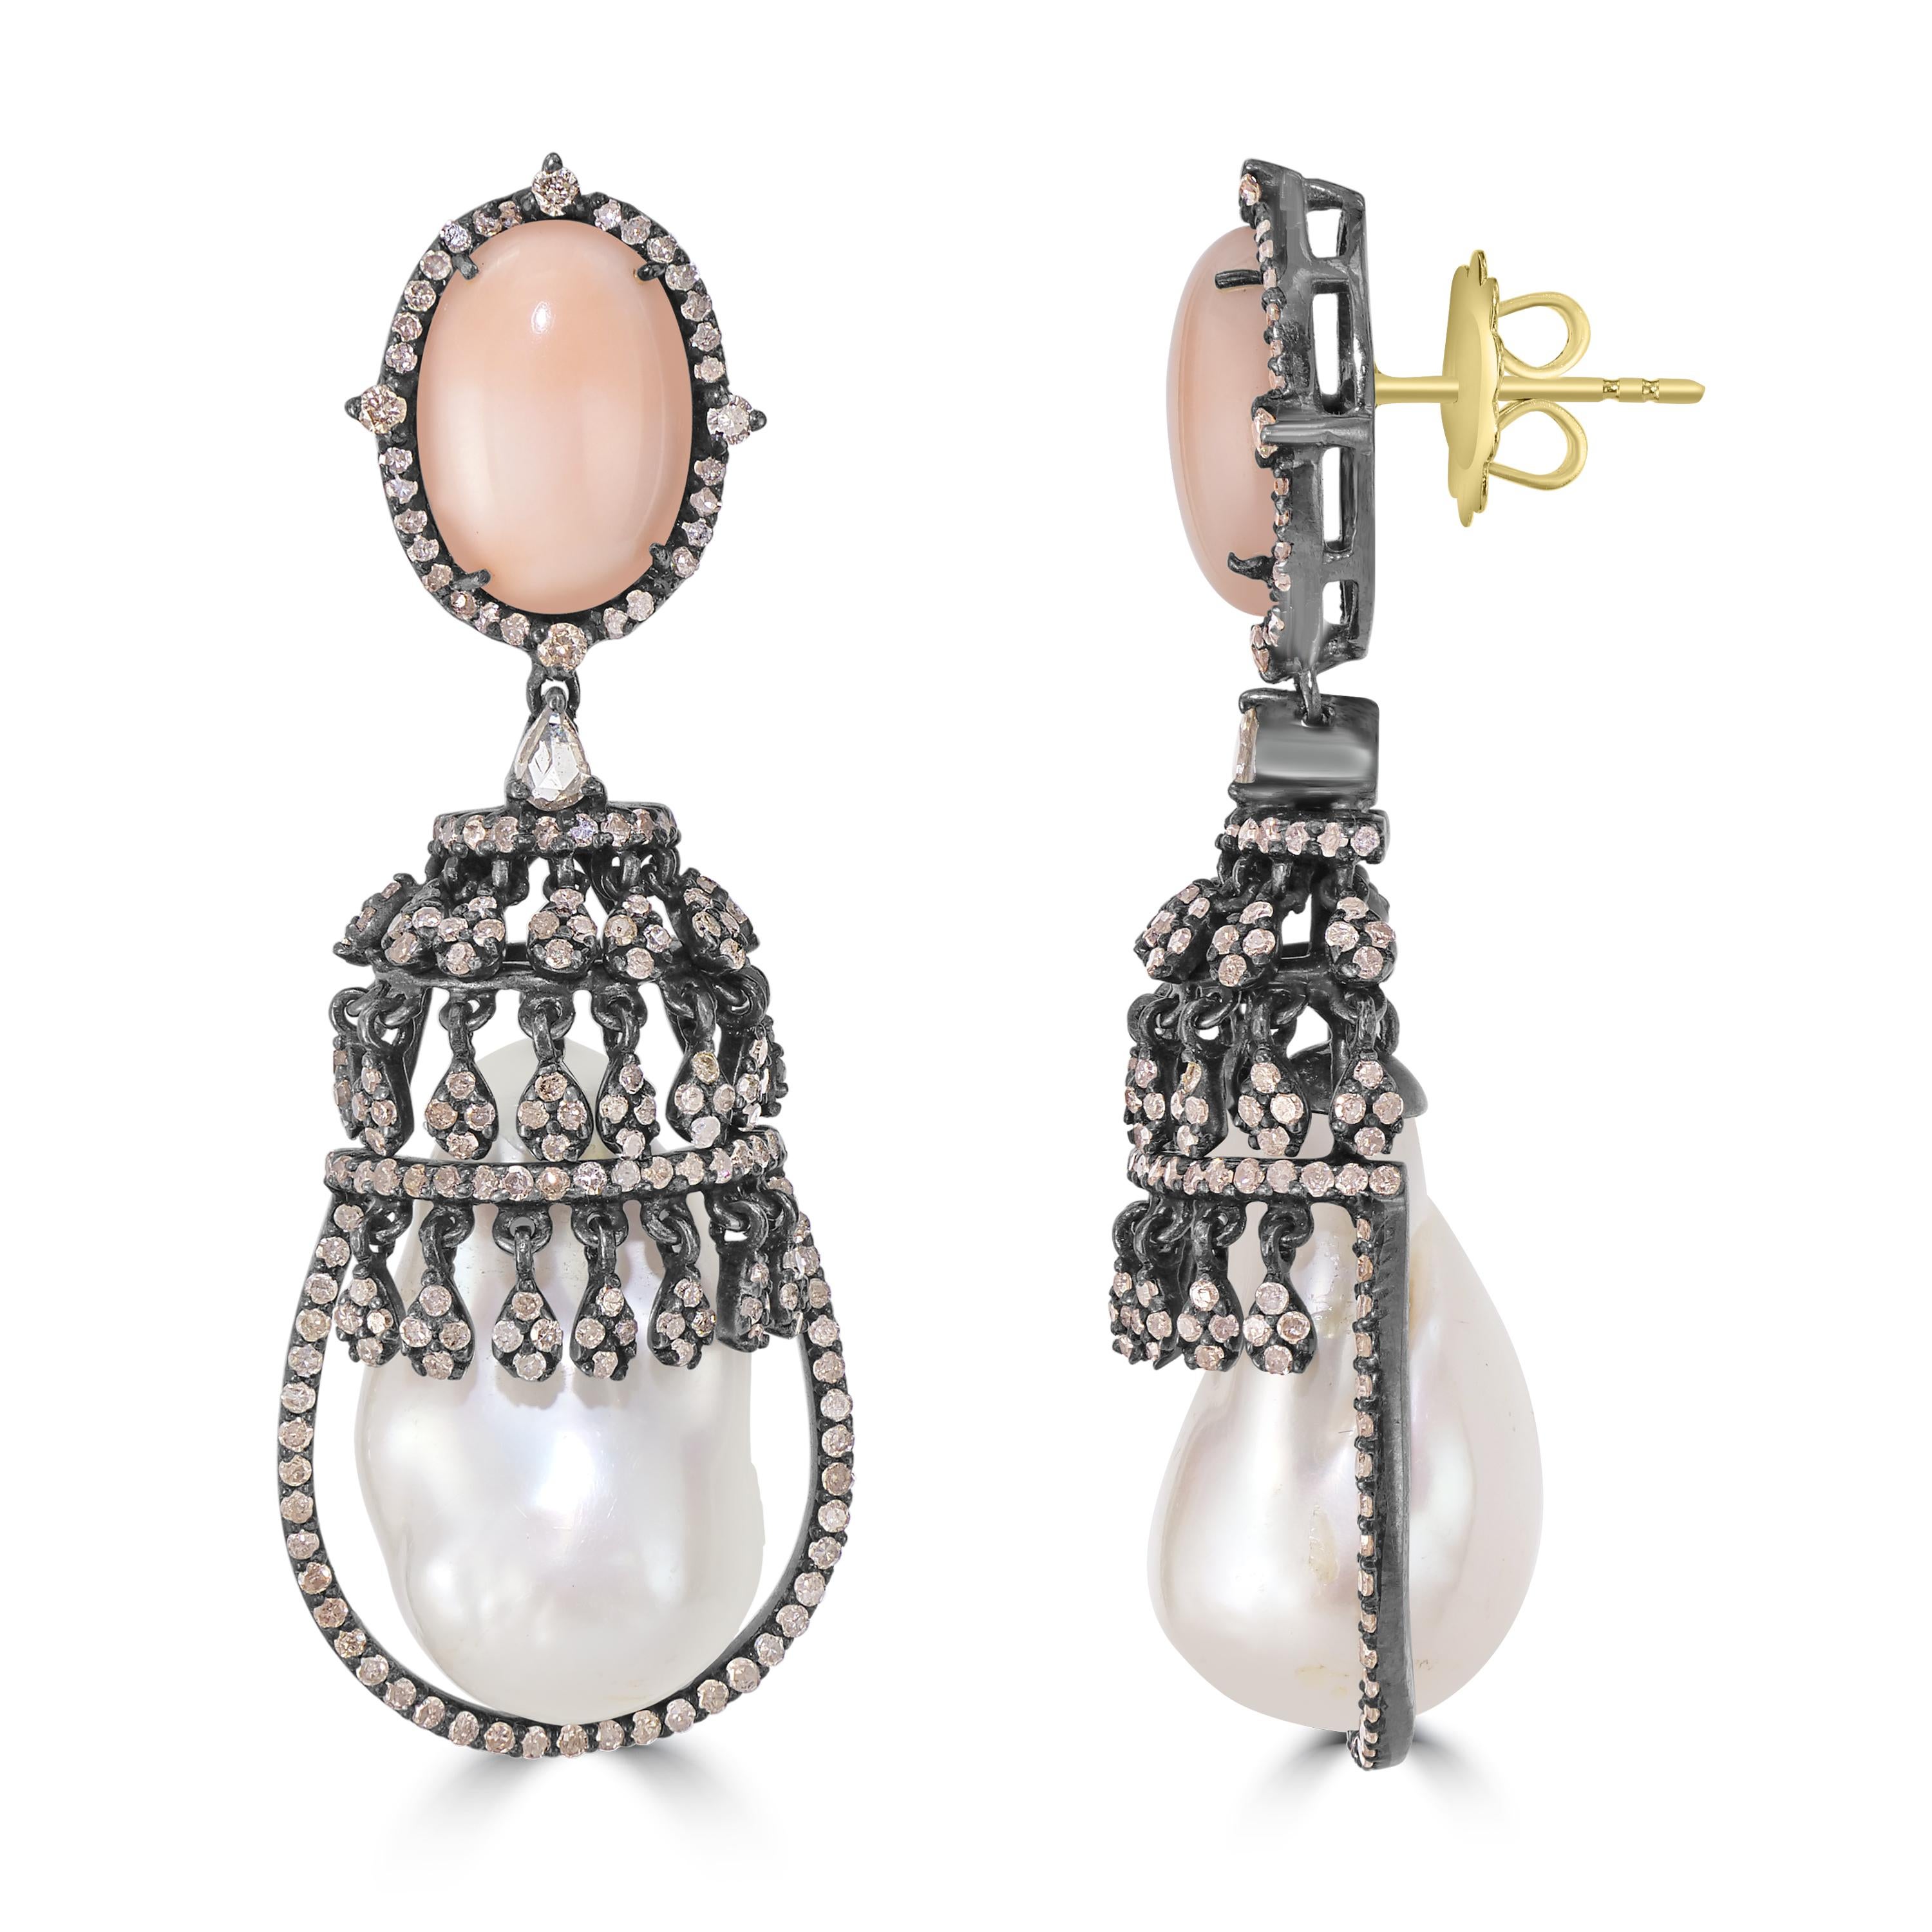 Oval Cut Victorian 12 Cttw. Peach Coral and Diamond and Pearl Drop Earrings 